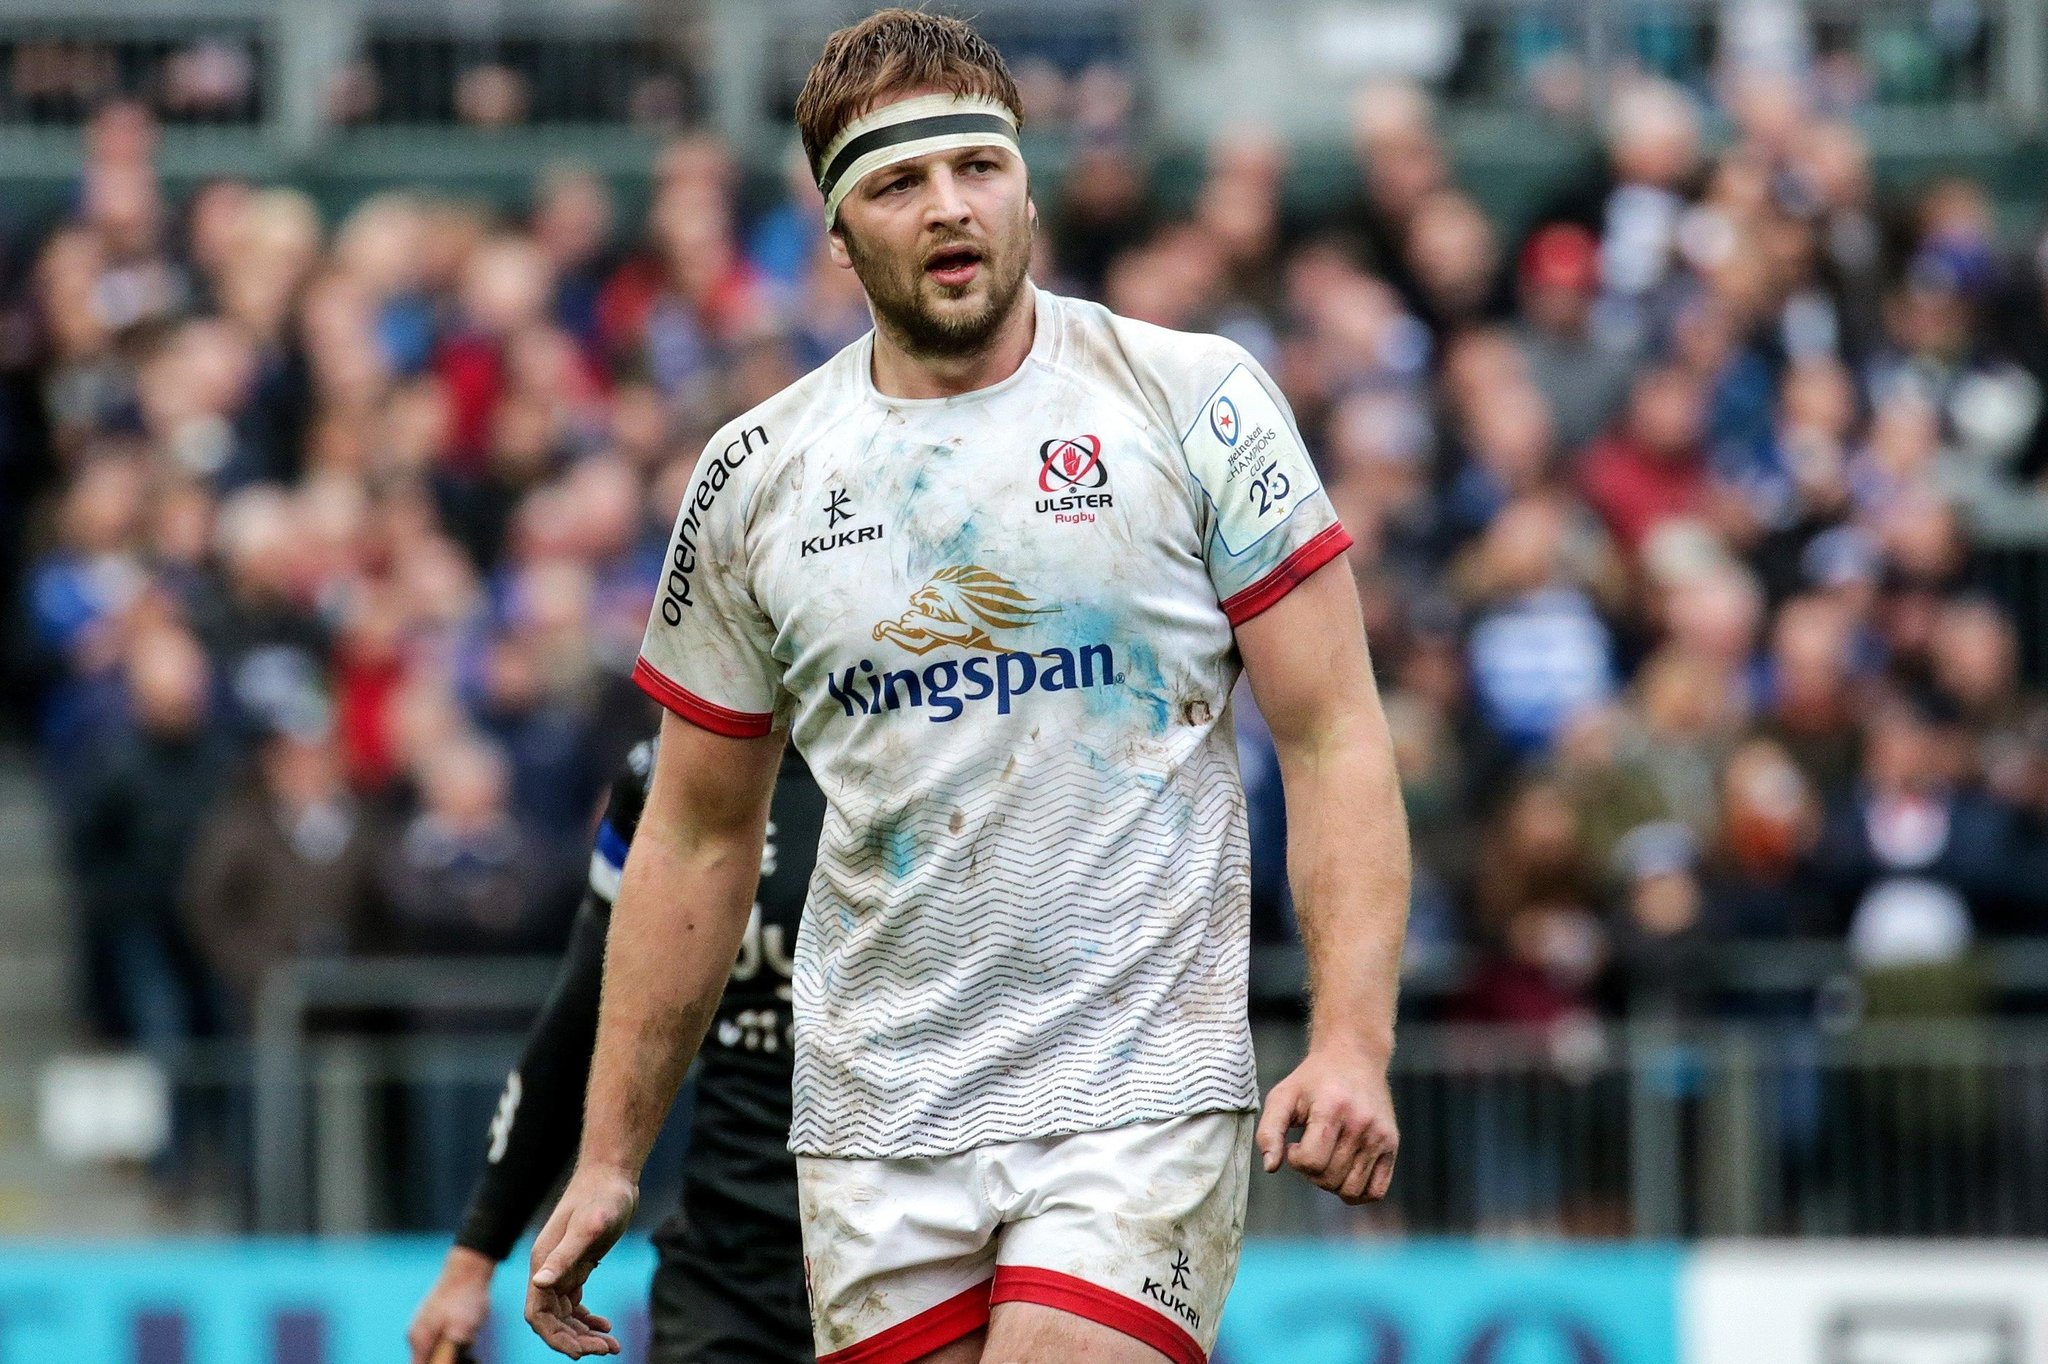 Ulster's Iain Henderson back in groove after Covid setback